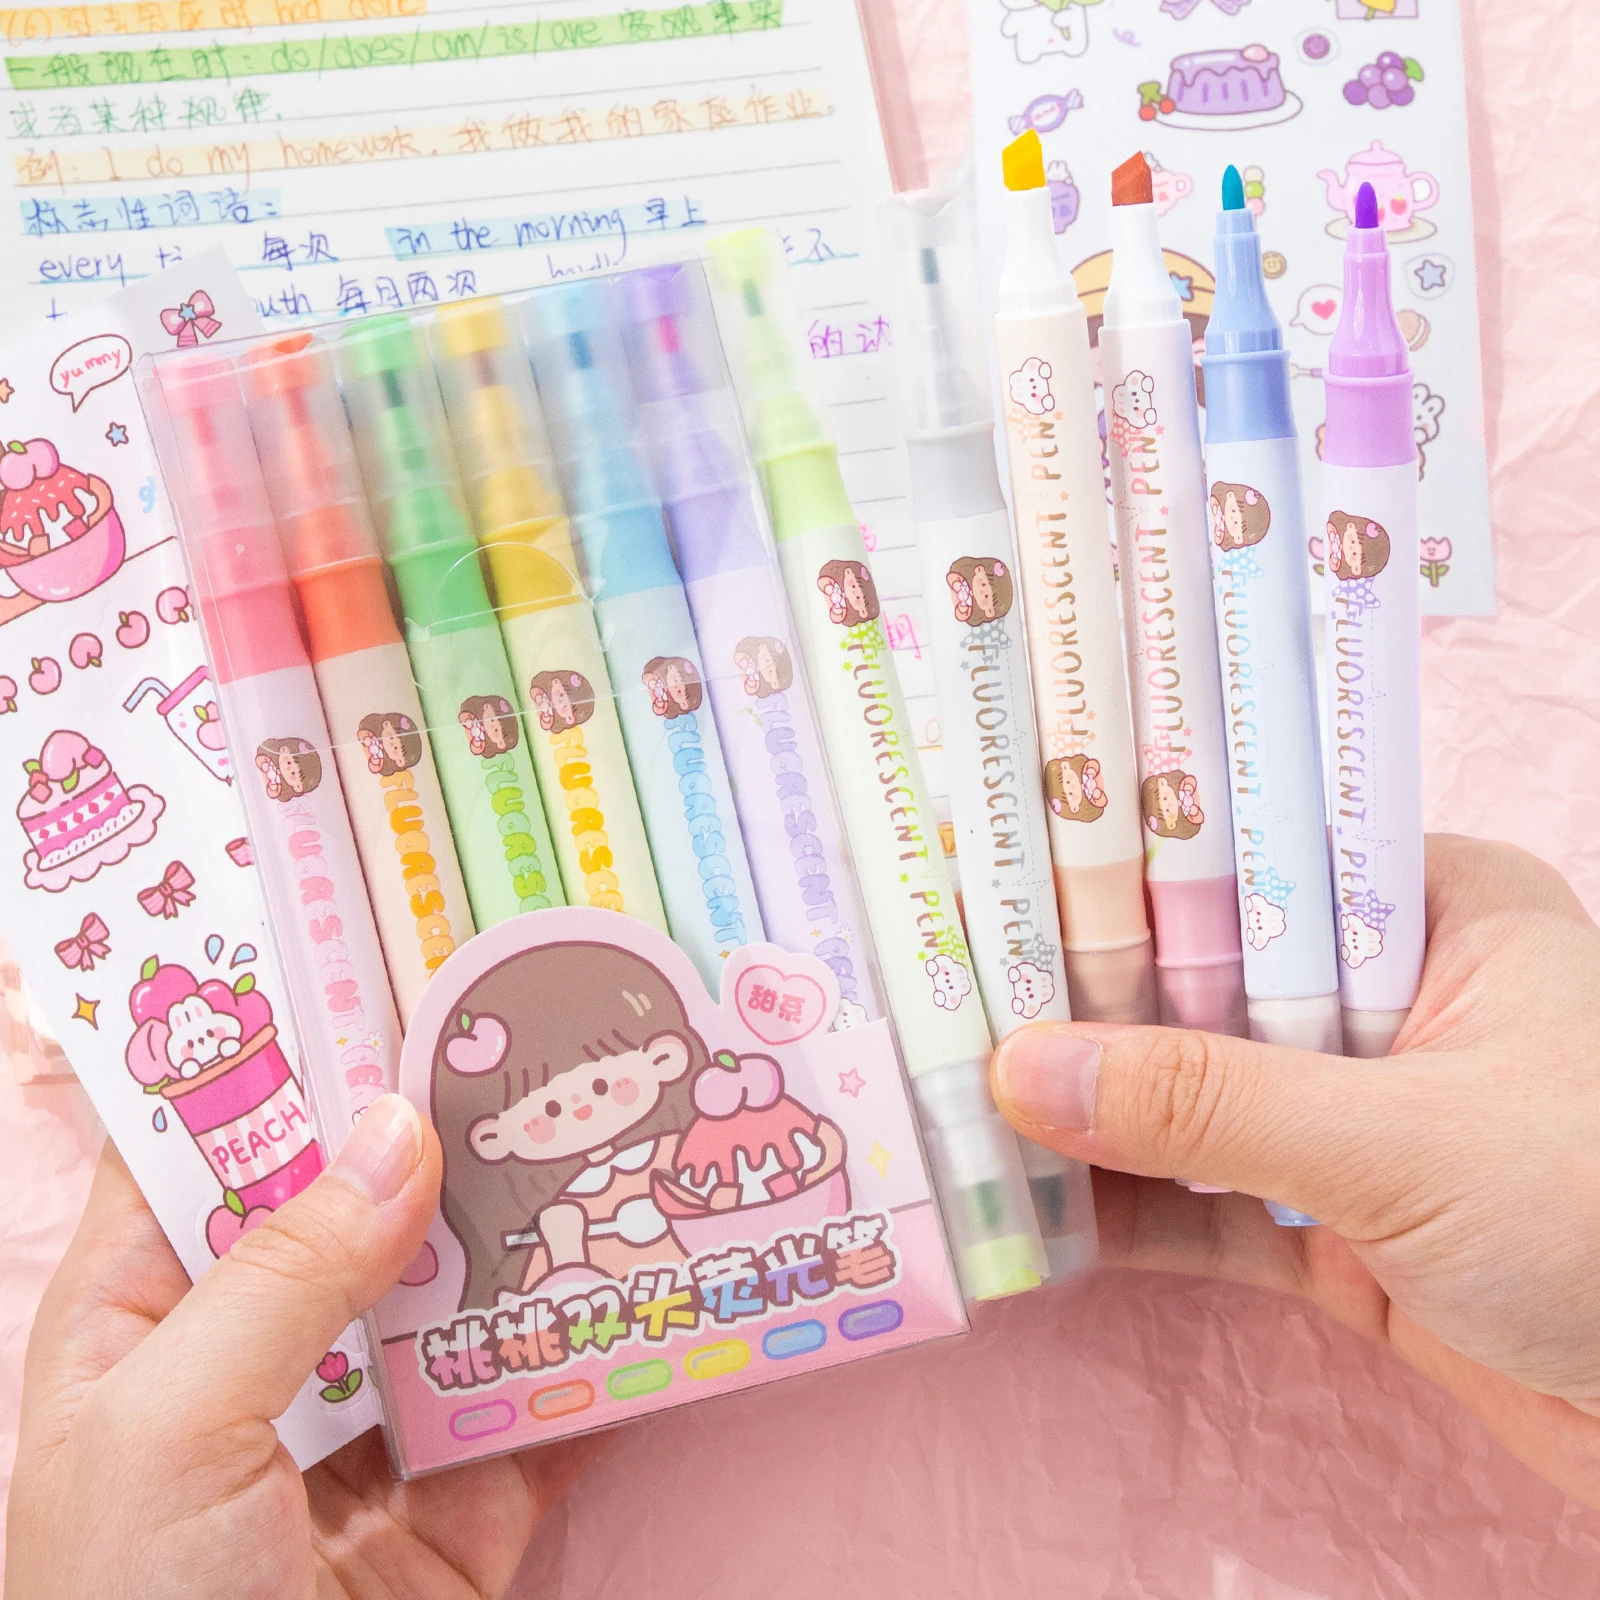 6PCS Pastel Highlighters Fluorescent Pen School Stationery Kawaiii office Supplies Marker Pens Colored Markers Cute Drawing Pens scorch pen marker burning markers pens stationery for crafts projects